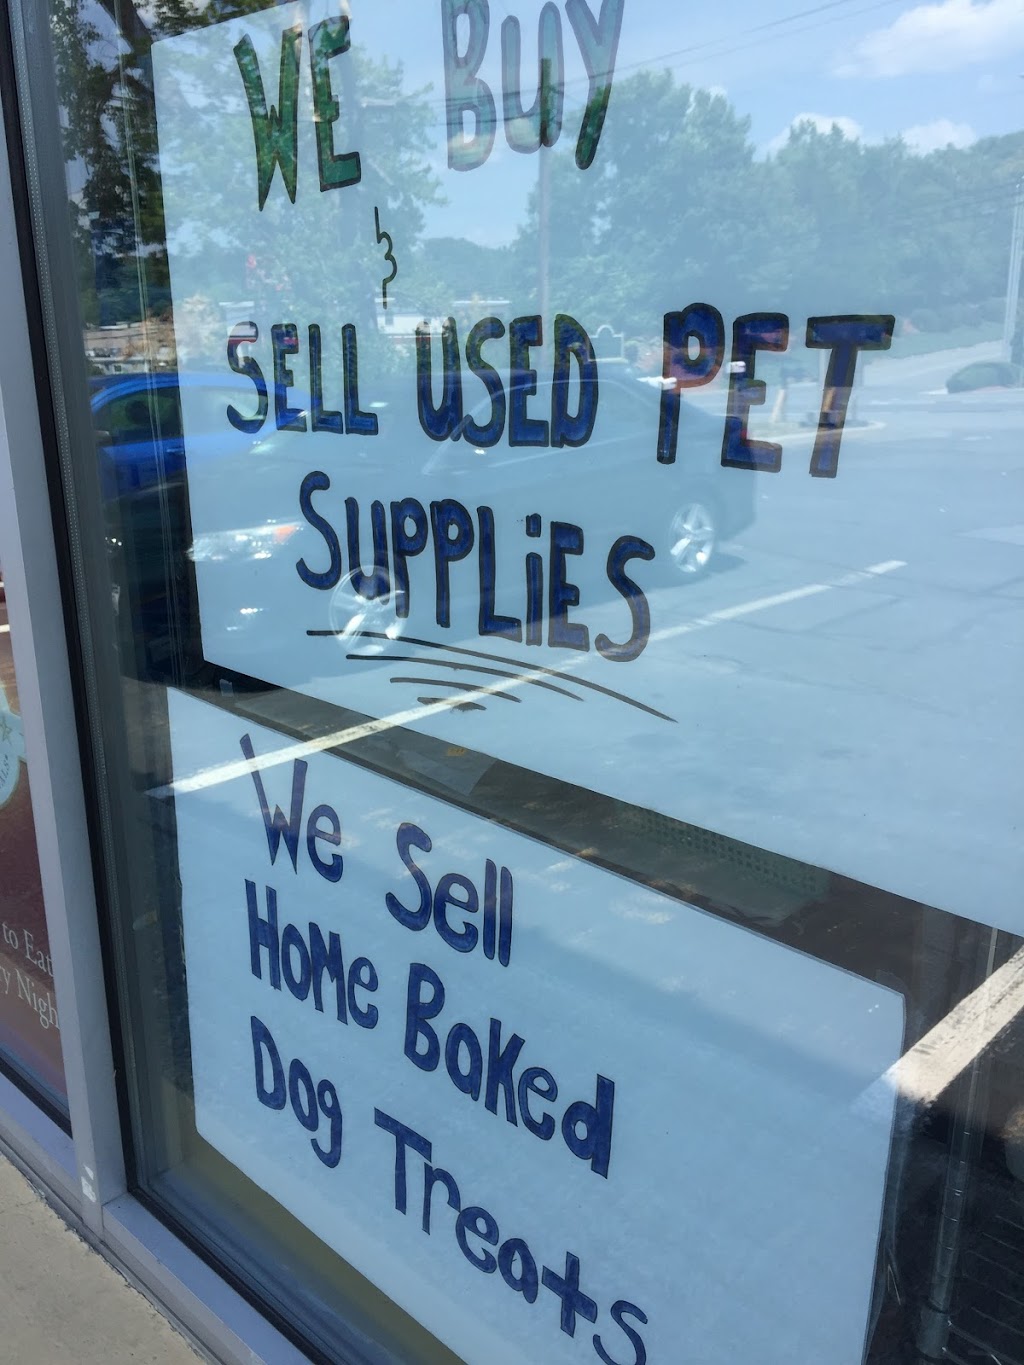 Positively Pets | 152 Windsor Hwy, New Windsor, NY 12553 | Phone: (845) 565-0722